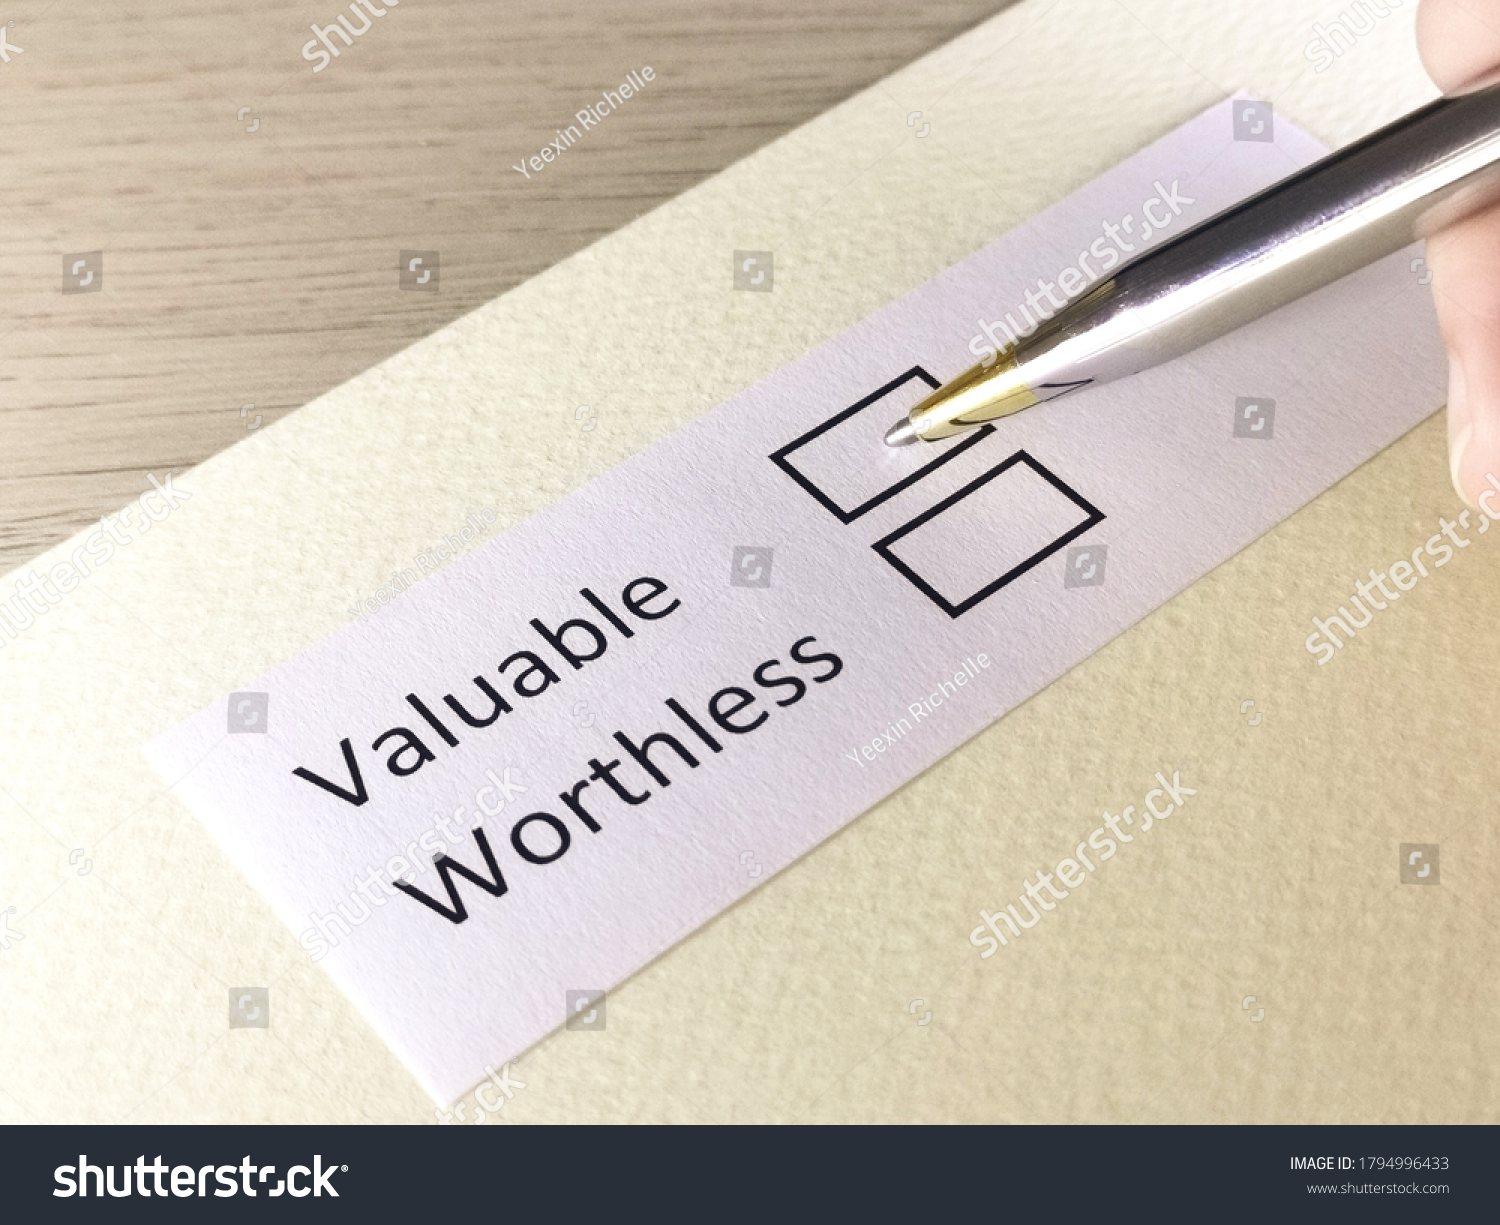 One person is answering question on a piece of paper. The person is thinking to choose valuable or worthless. #1794996433